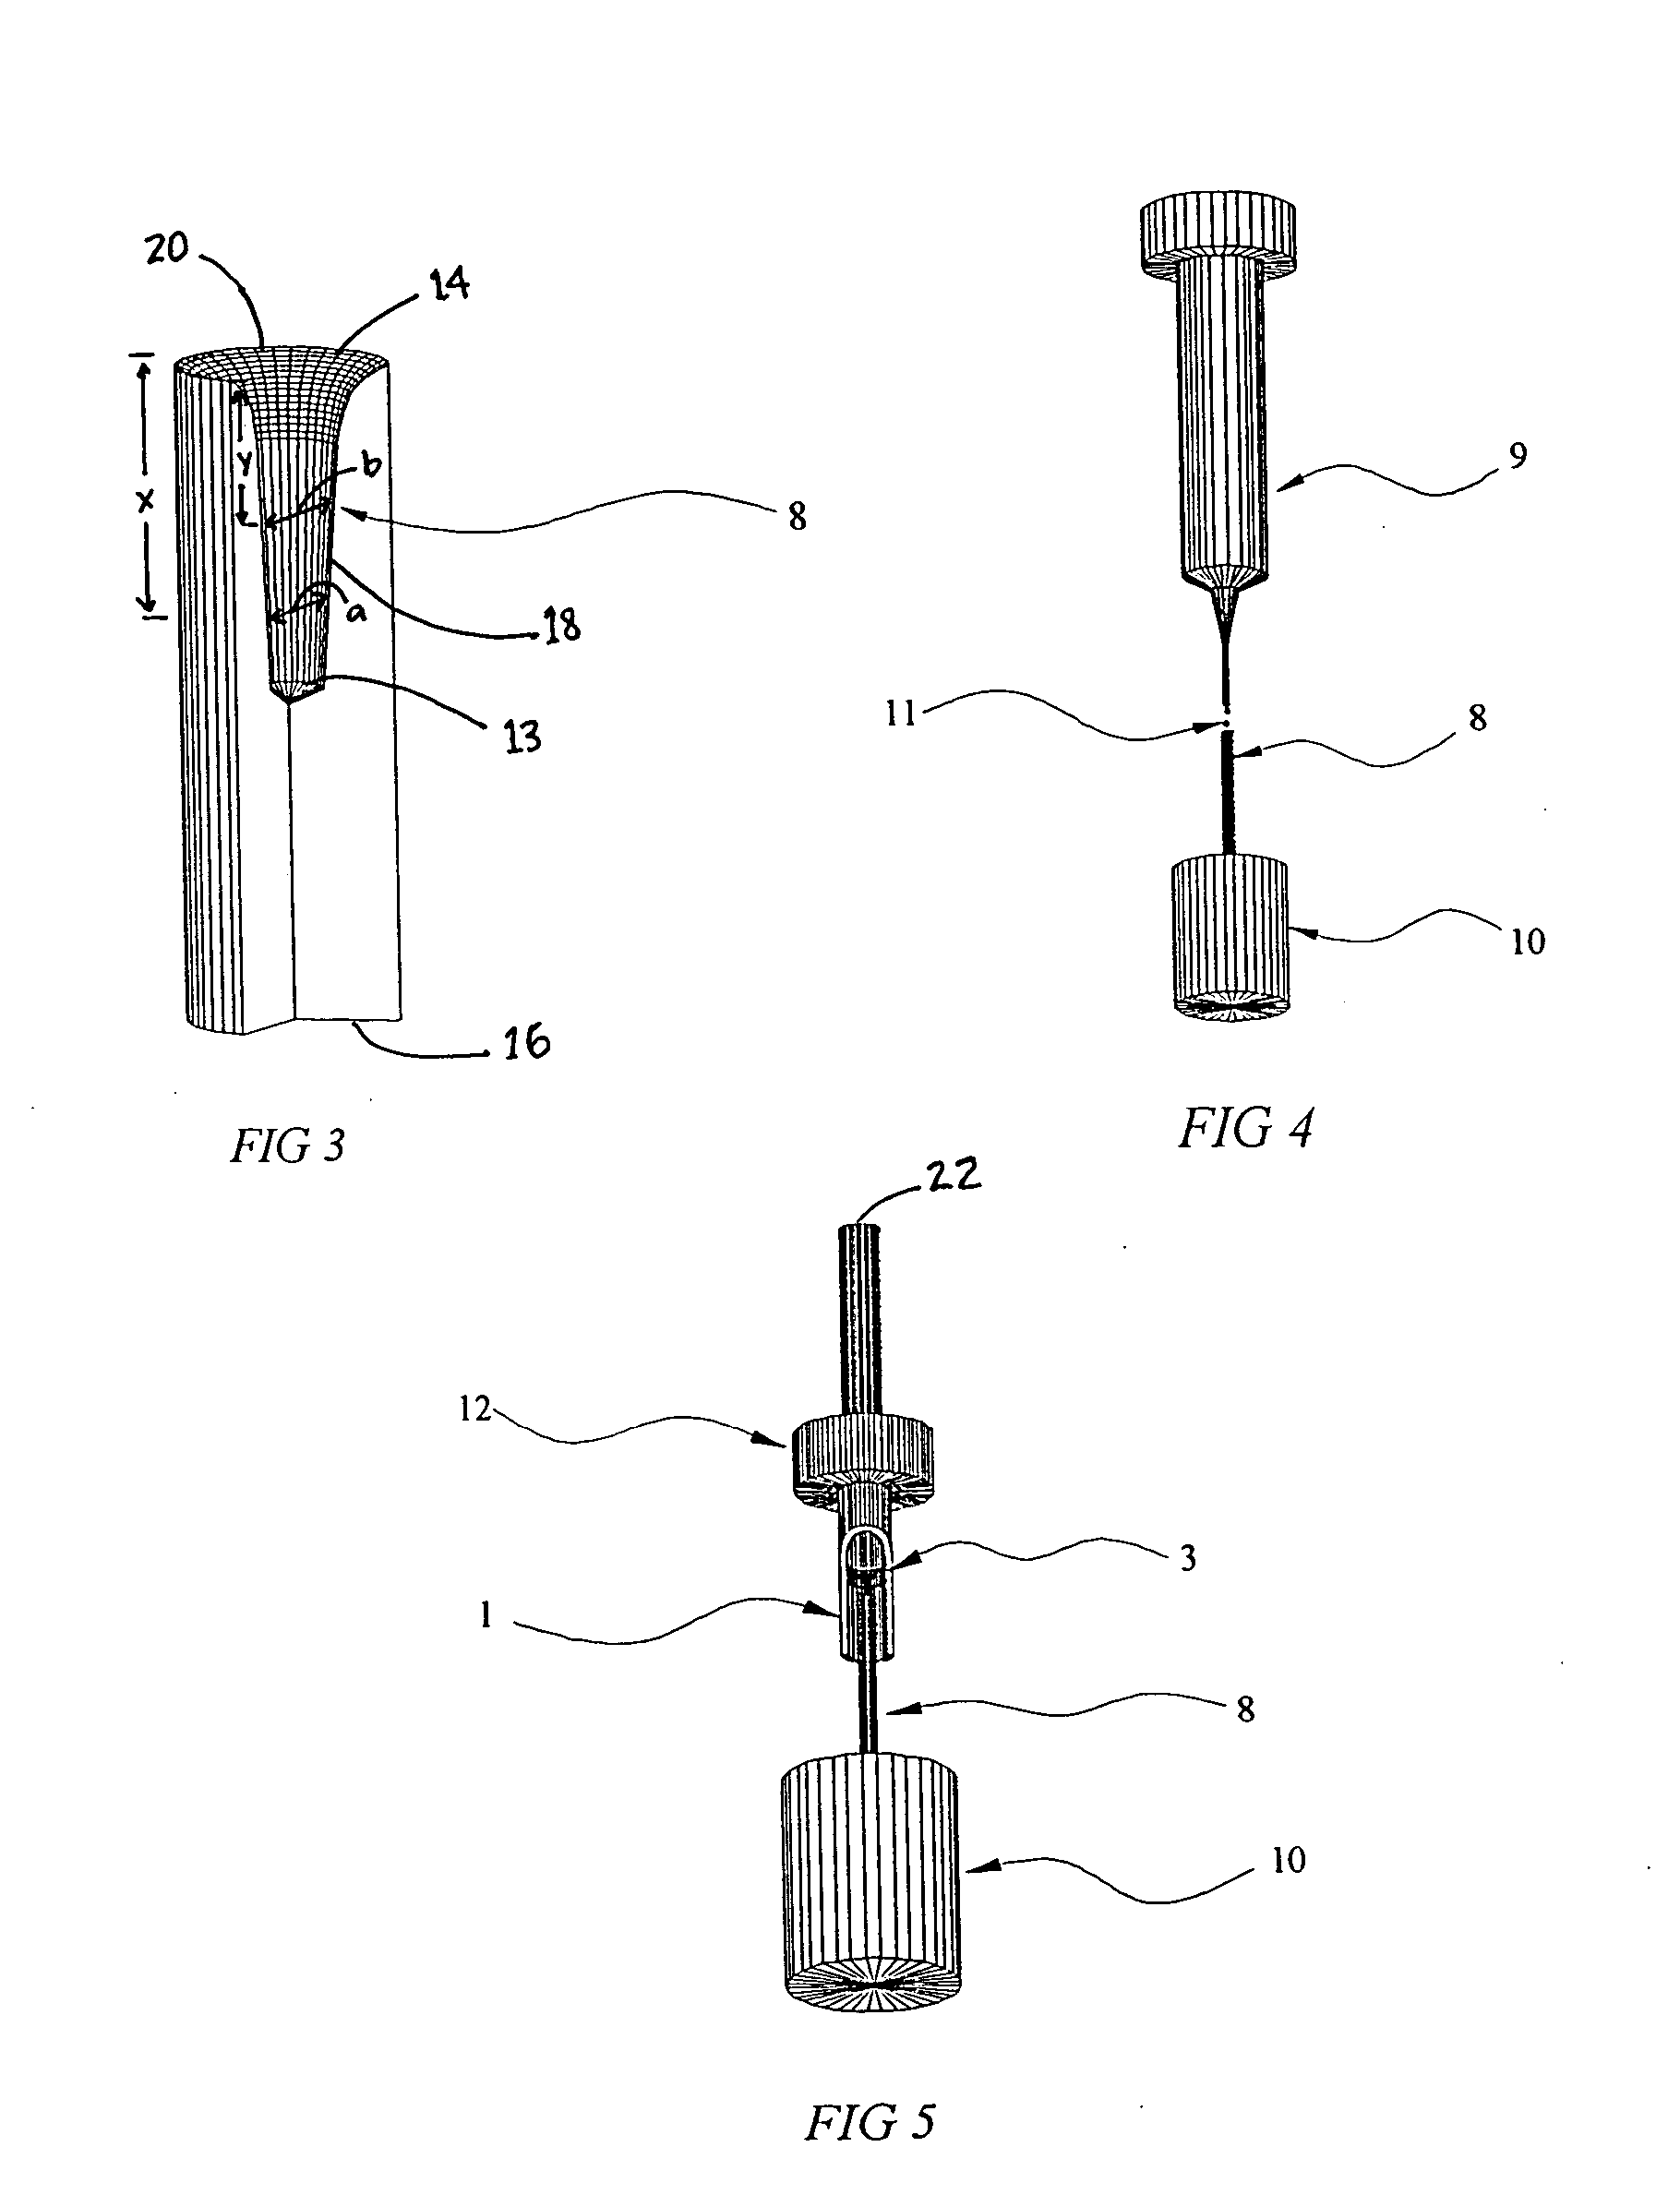 Apparatus and method for banding the interior substrate of a tubular device and the products formed therefrom